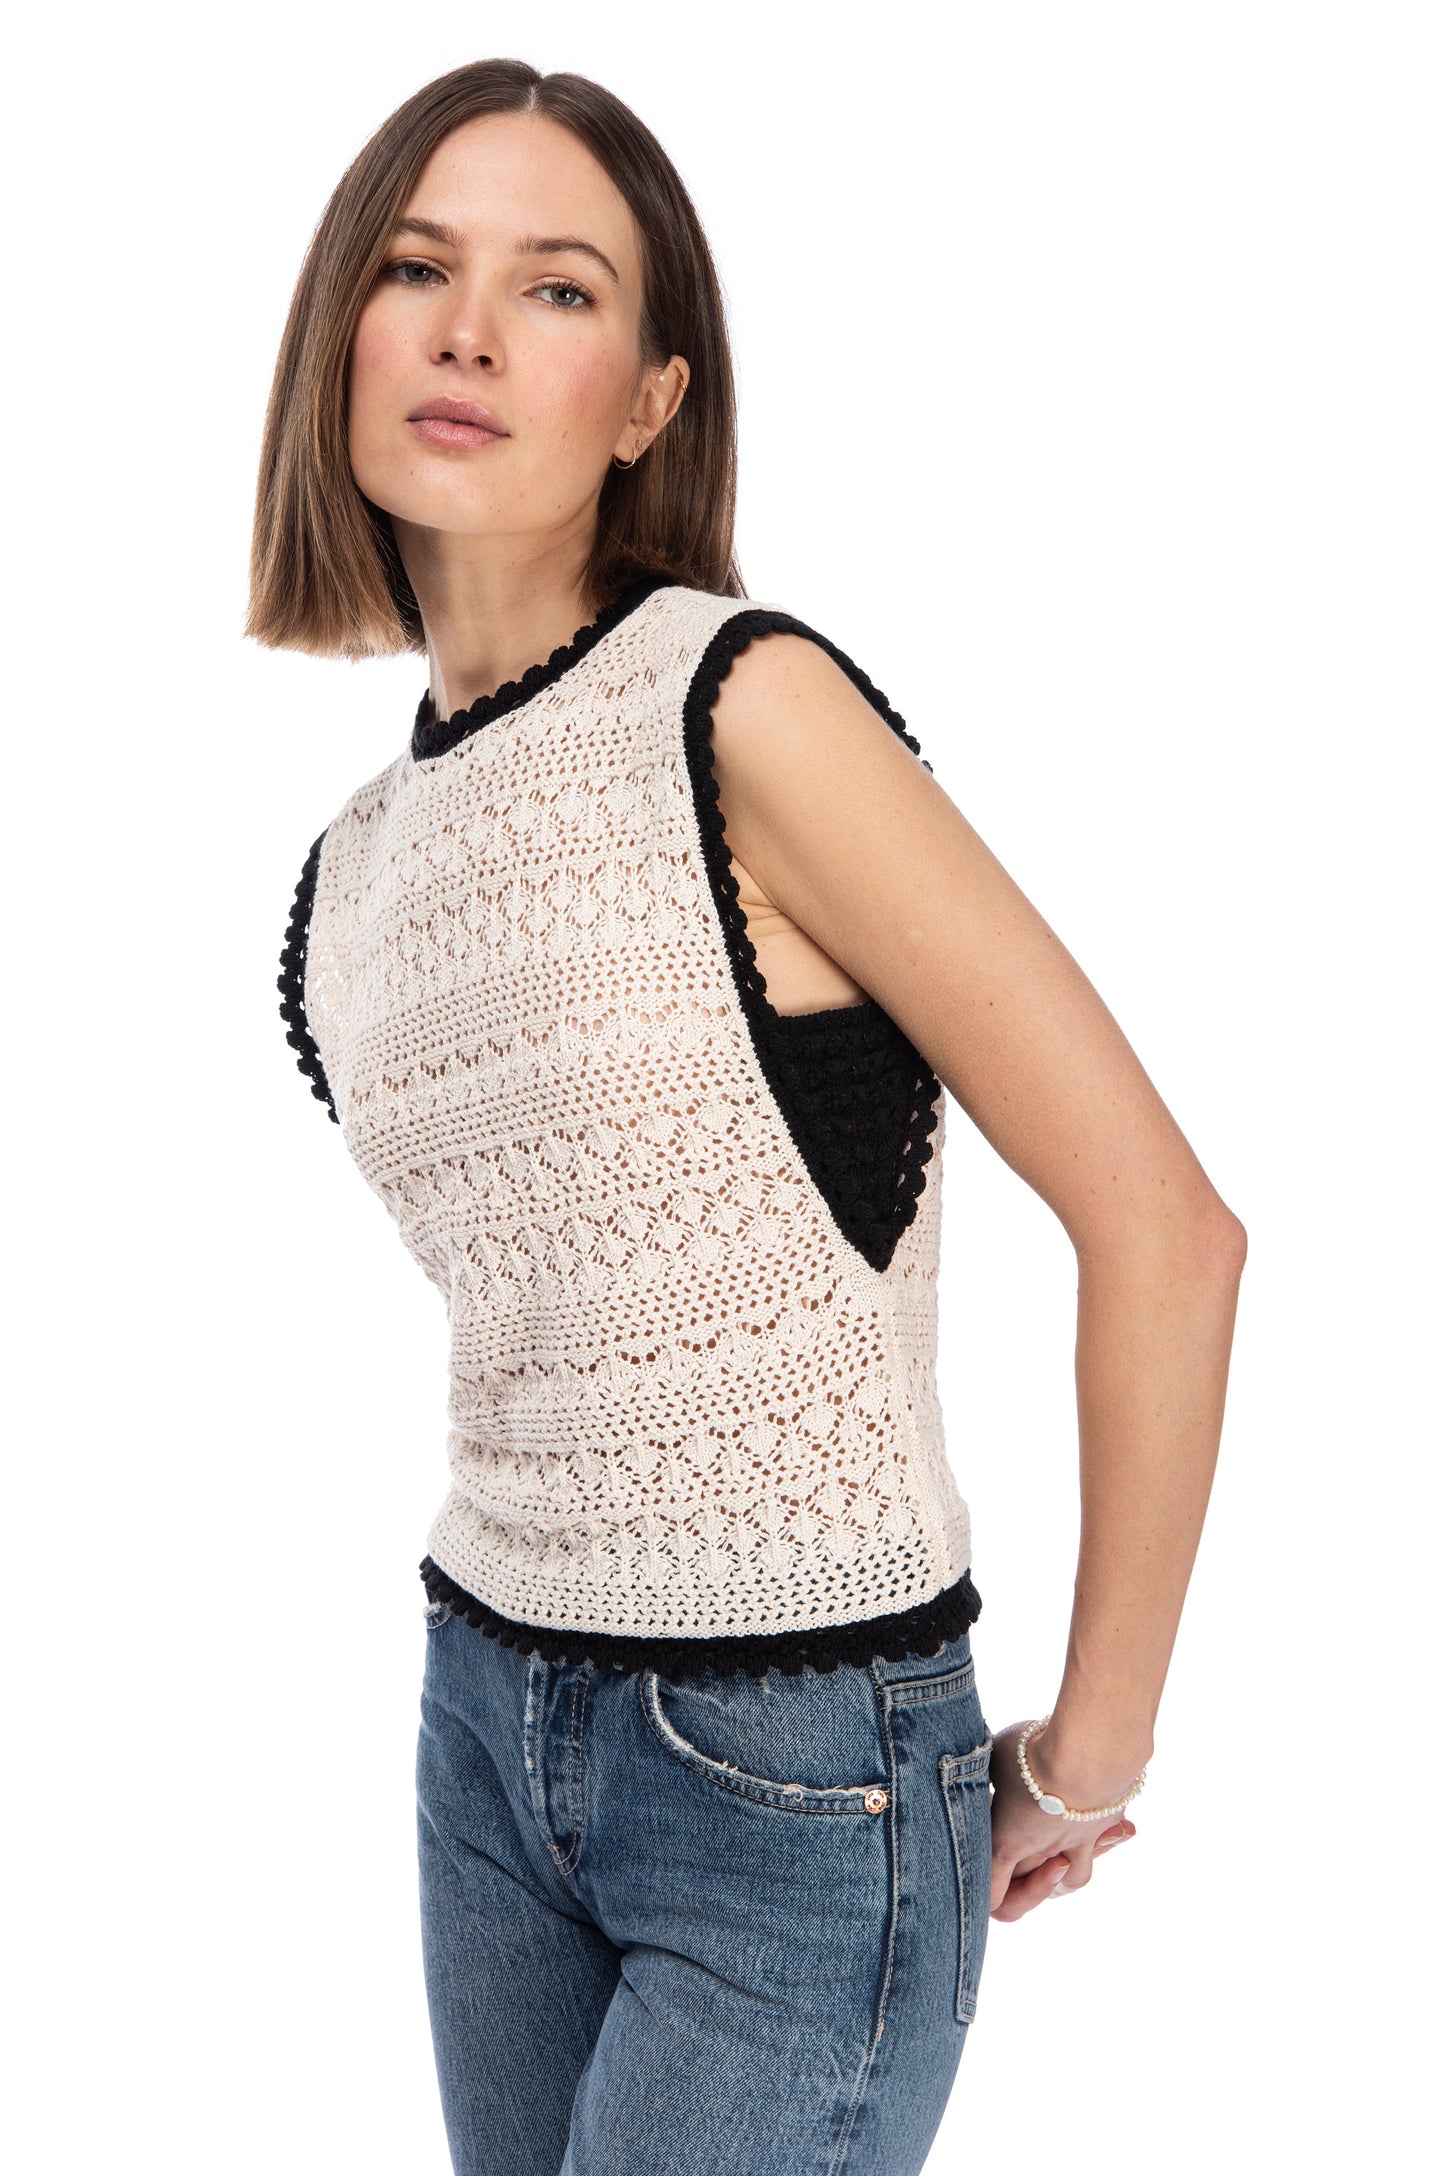 Woman posing in a stylish B Collection by Bobeau SLVLSS CROCHET SWEATER TOP with scalloped edges and classic blue jeans against a white background.